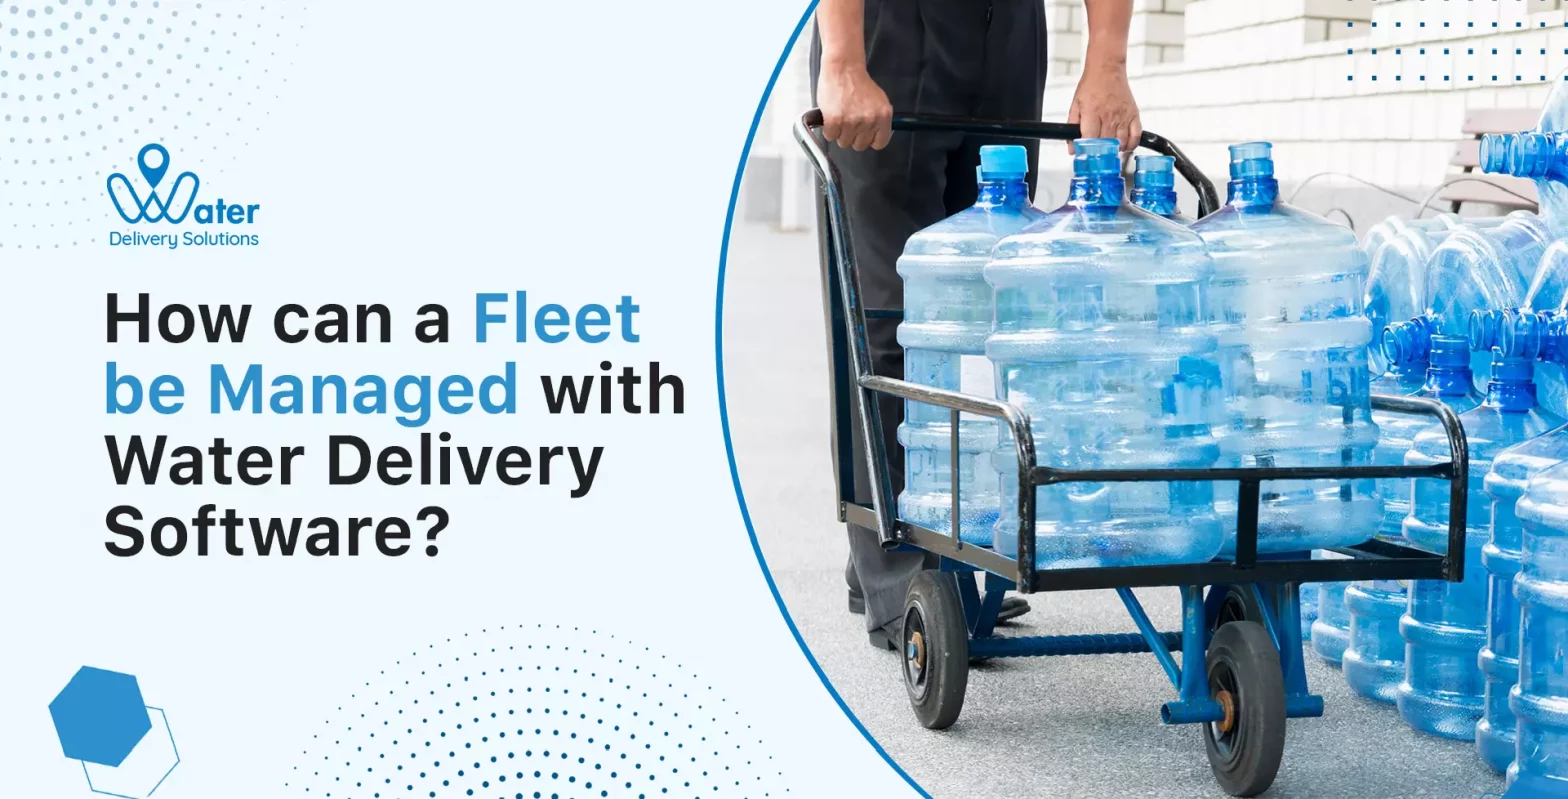 ravi garg, wds, fleet managed, water delivery, delivery business, water business, software